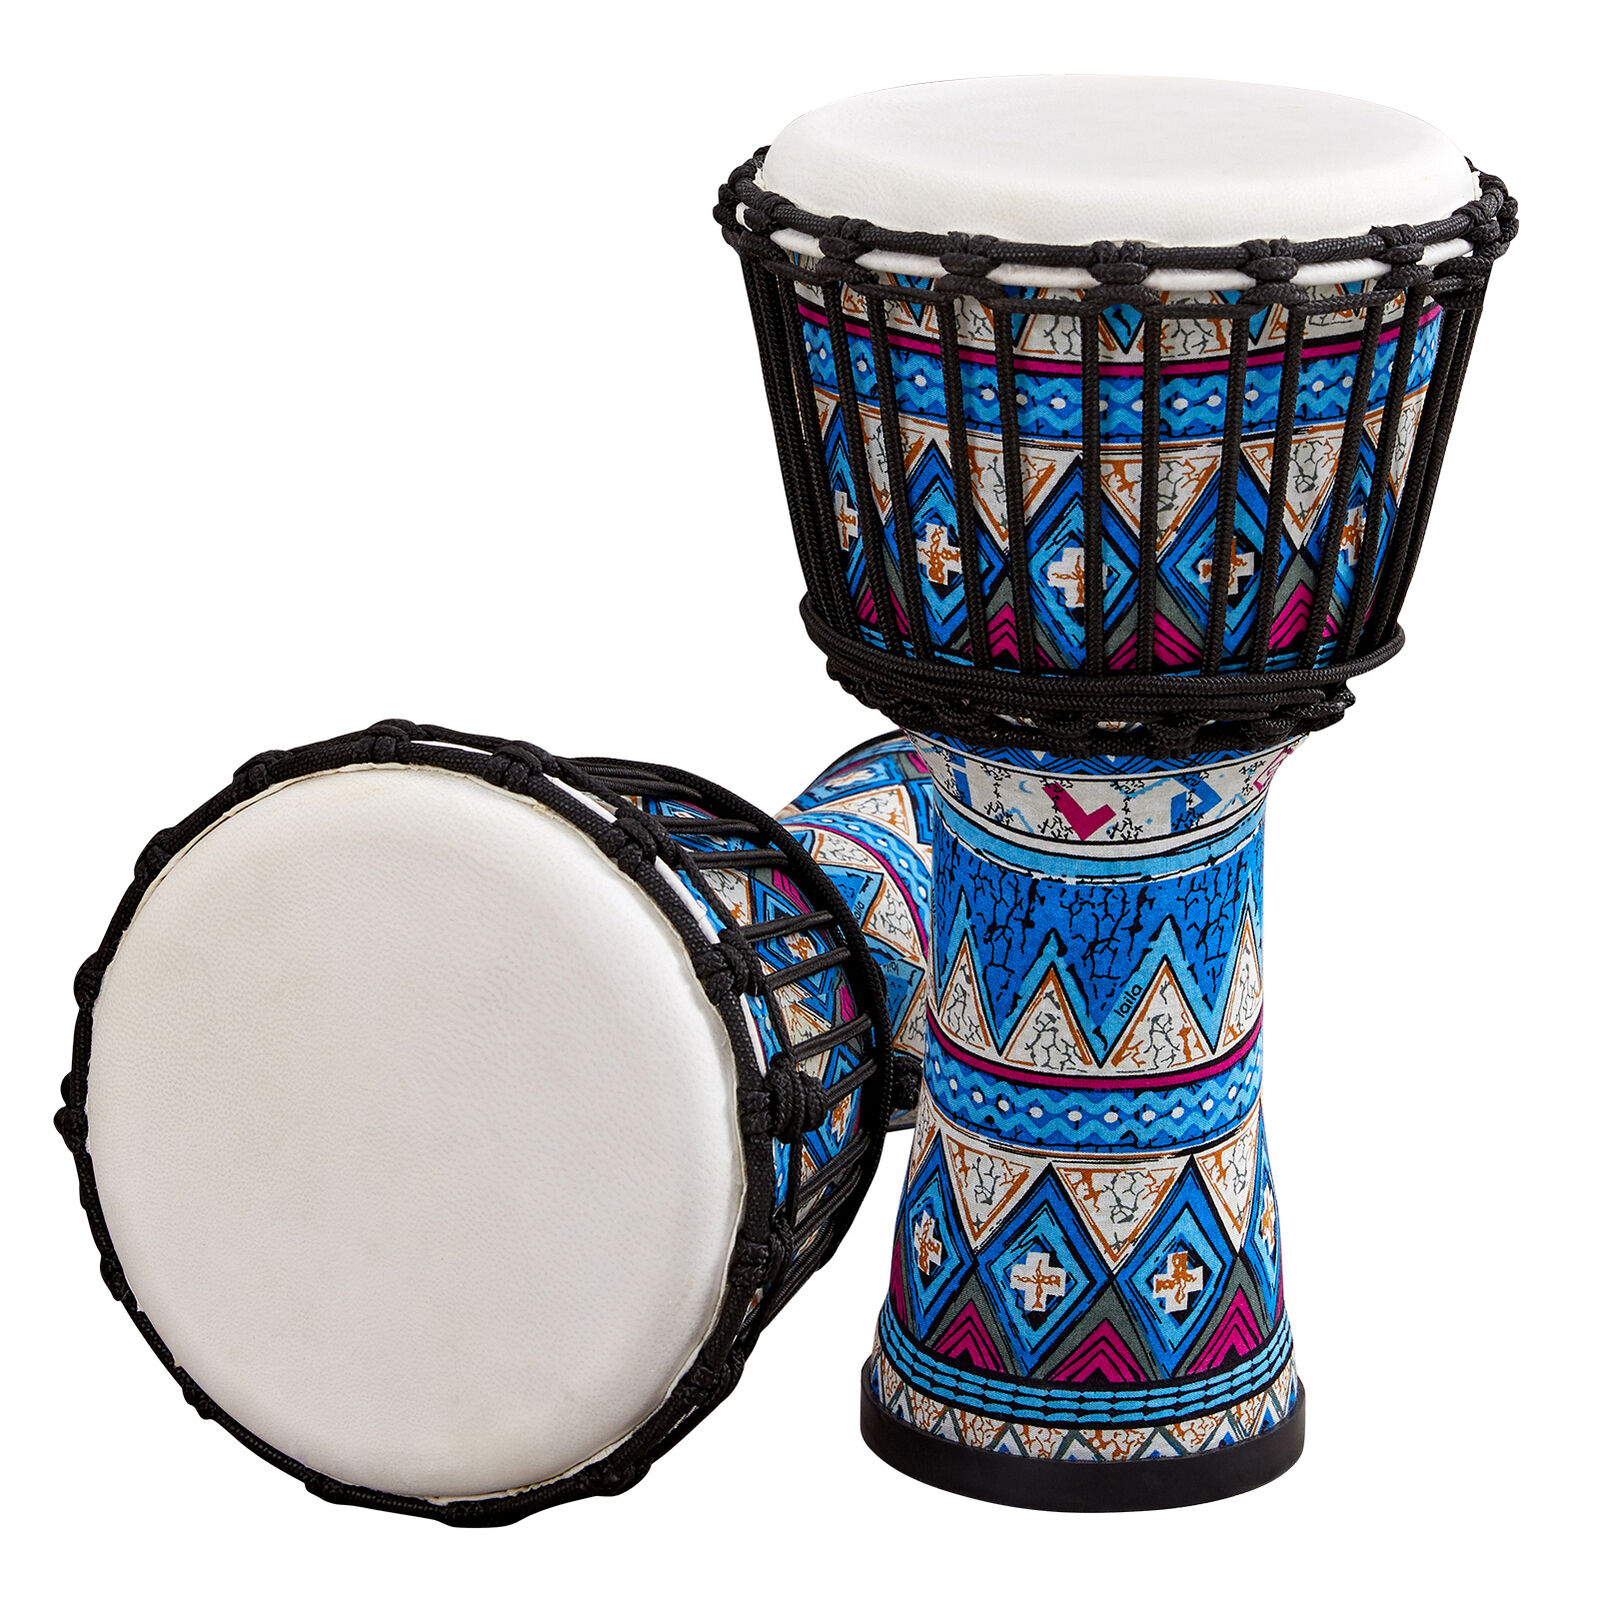 Djembe African Hand Drum Goat Skin Drumhead Percussion Musical Instrument E1A9